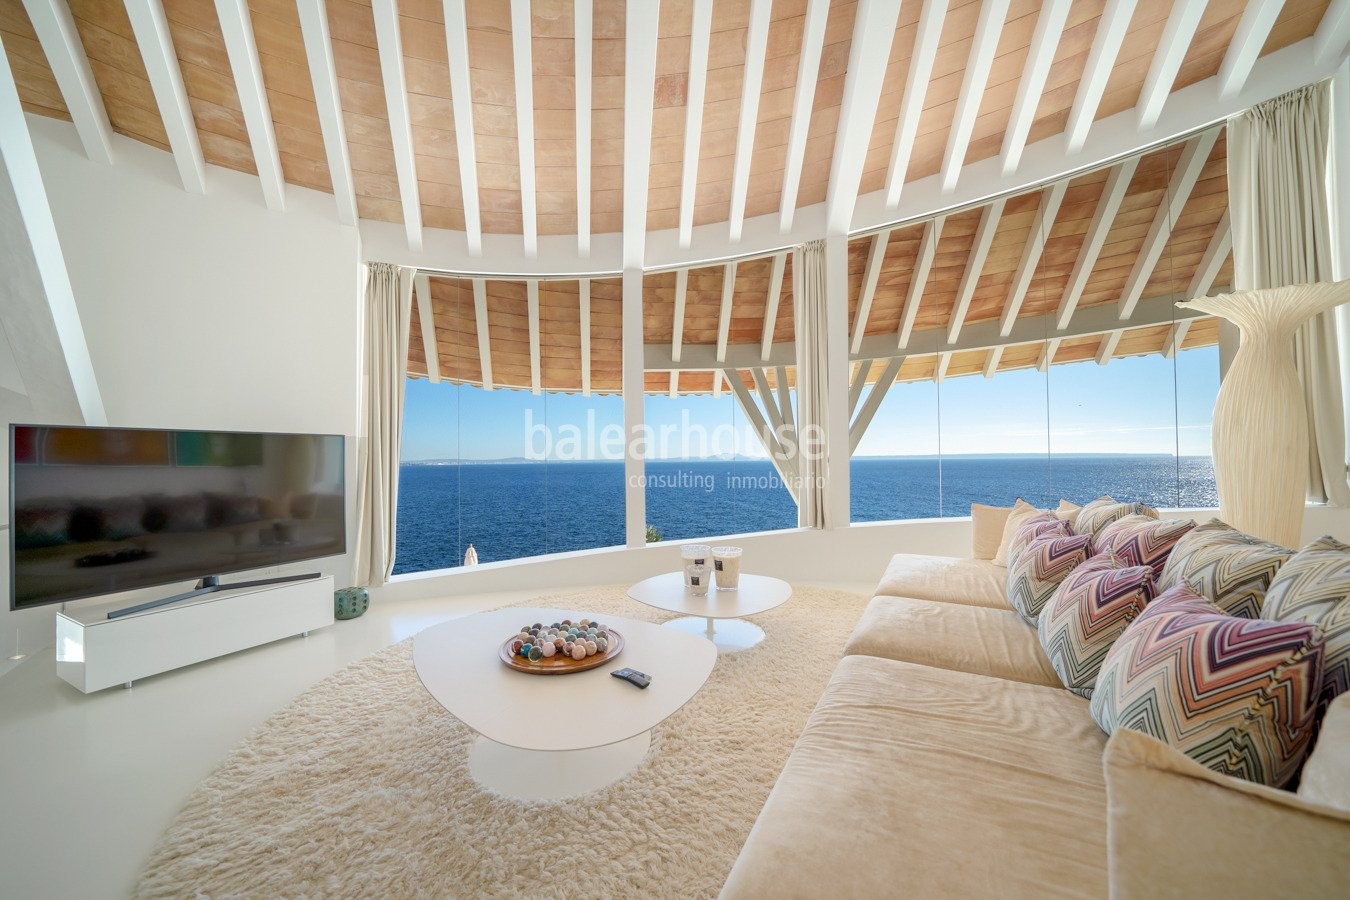 Remarkable architecture and incredible views from this iconic villa with direct sea access.